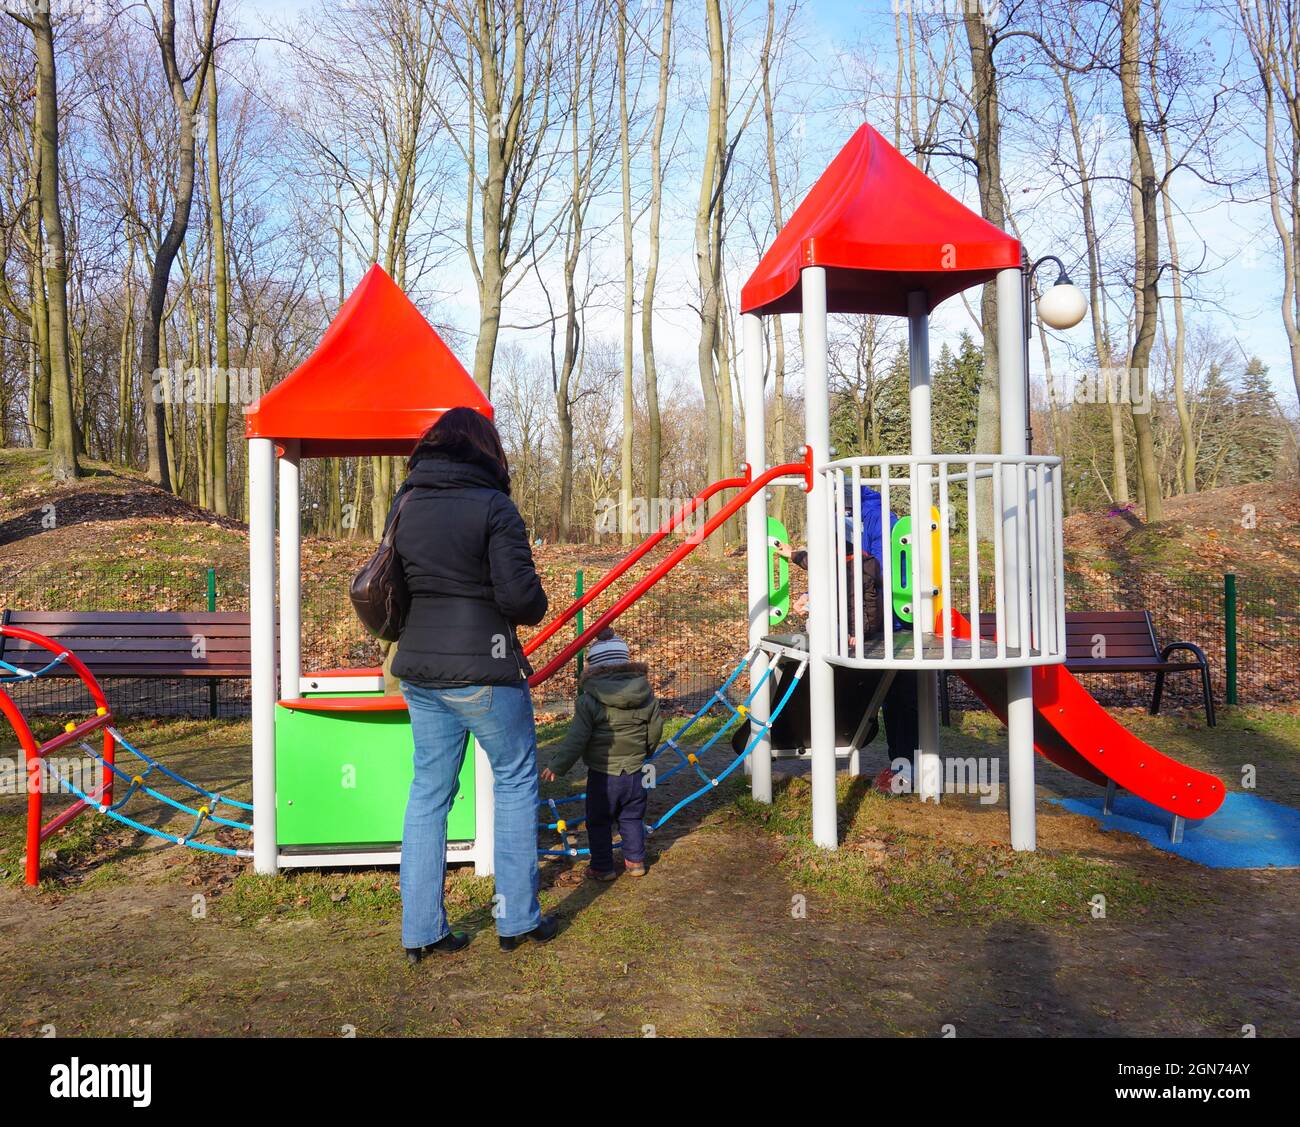 POZNAN, POLAND - Feb 07, 2016: An unidentified woman standing with child by a climb equipment on a play ground at the Citadel park Stock Photo